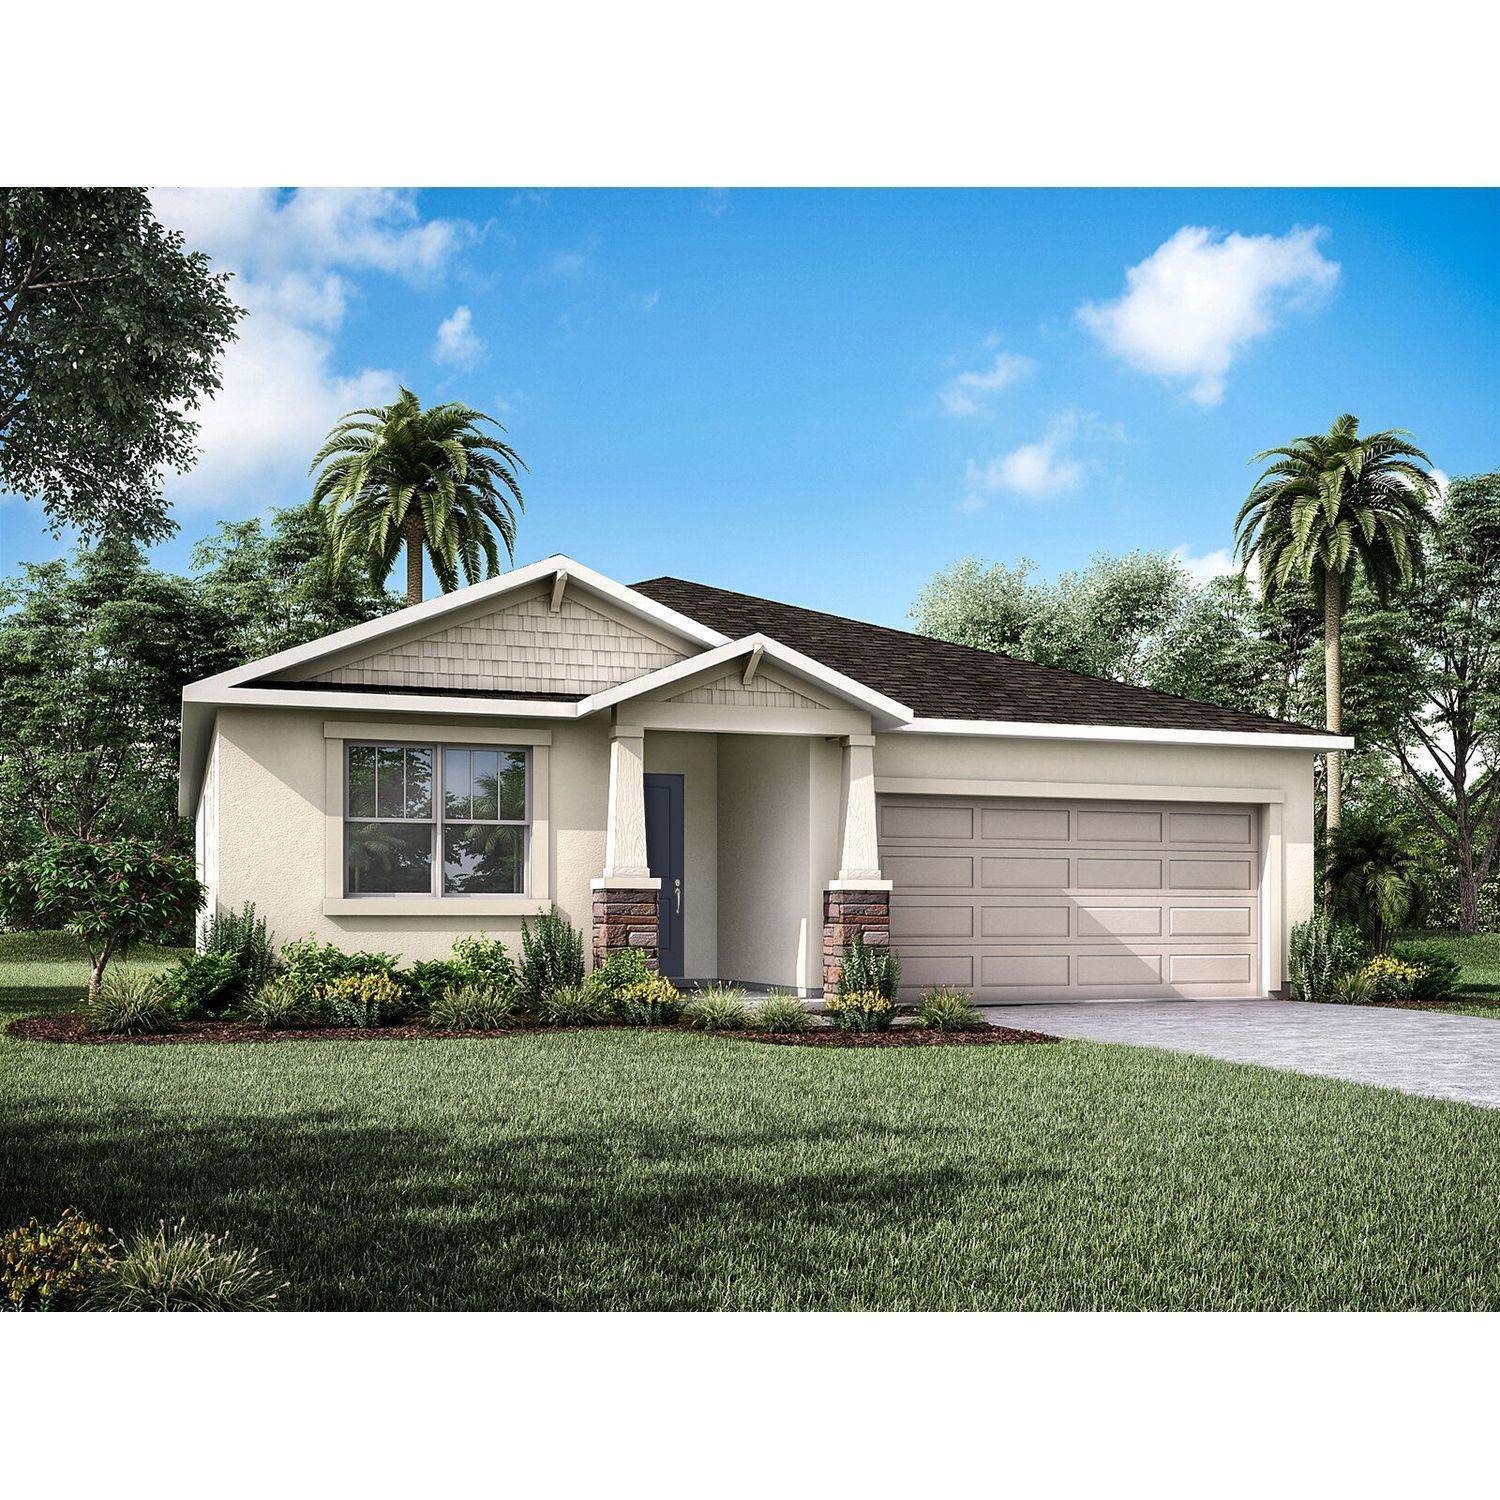 Single Family for Sale at Soleil 1114 Turquoise Waves Cove, Kissimmee, FL 34747